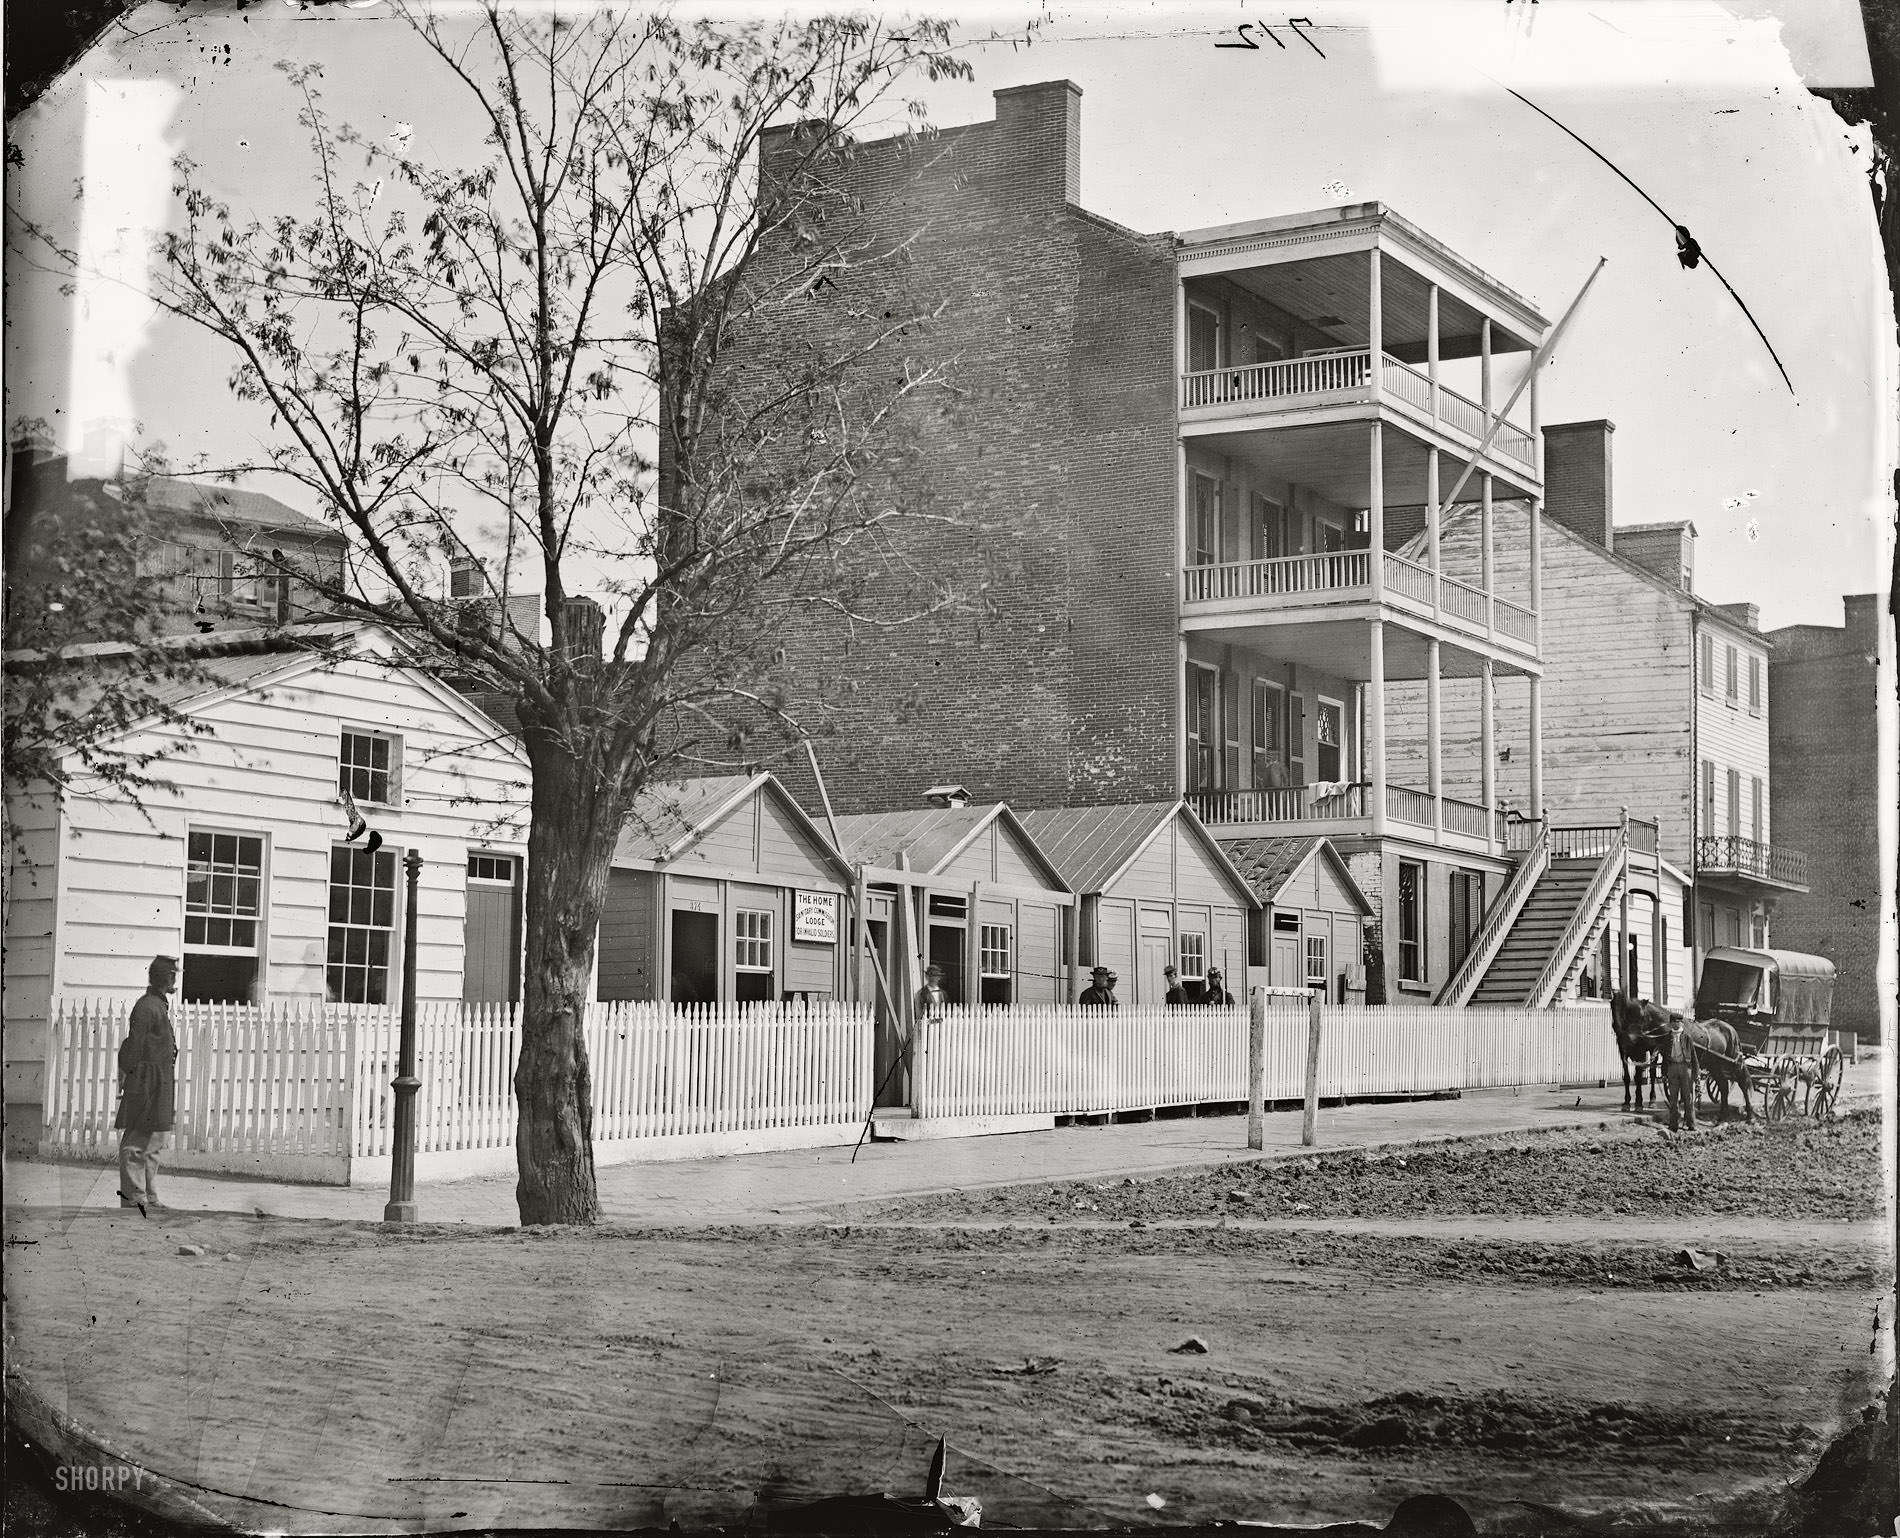 Buildings of the Sanitary Commission Home Lodge for Invalid Soldiers, North Capitol Street near C Street, Washington, D.C., 1865.